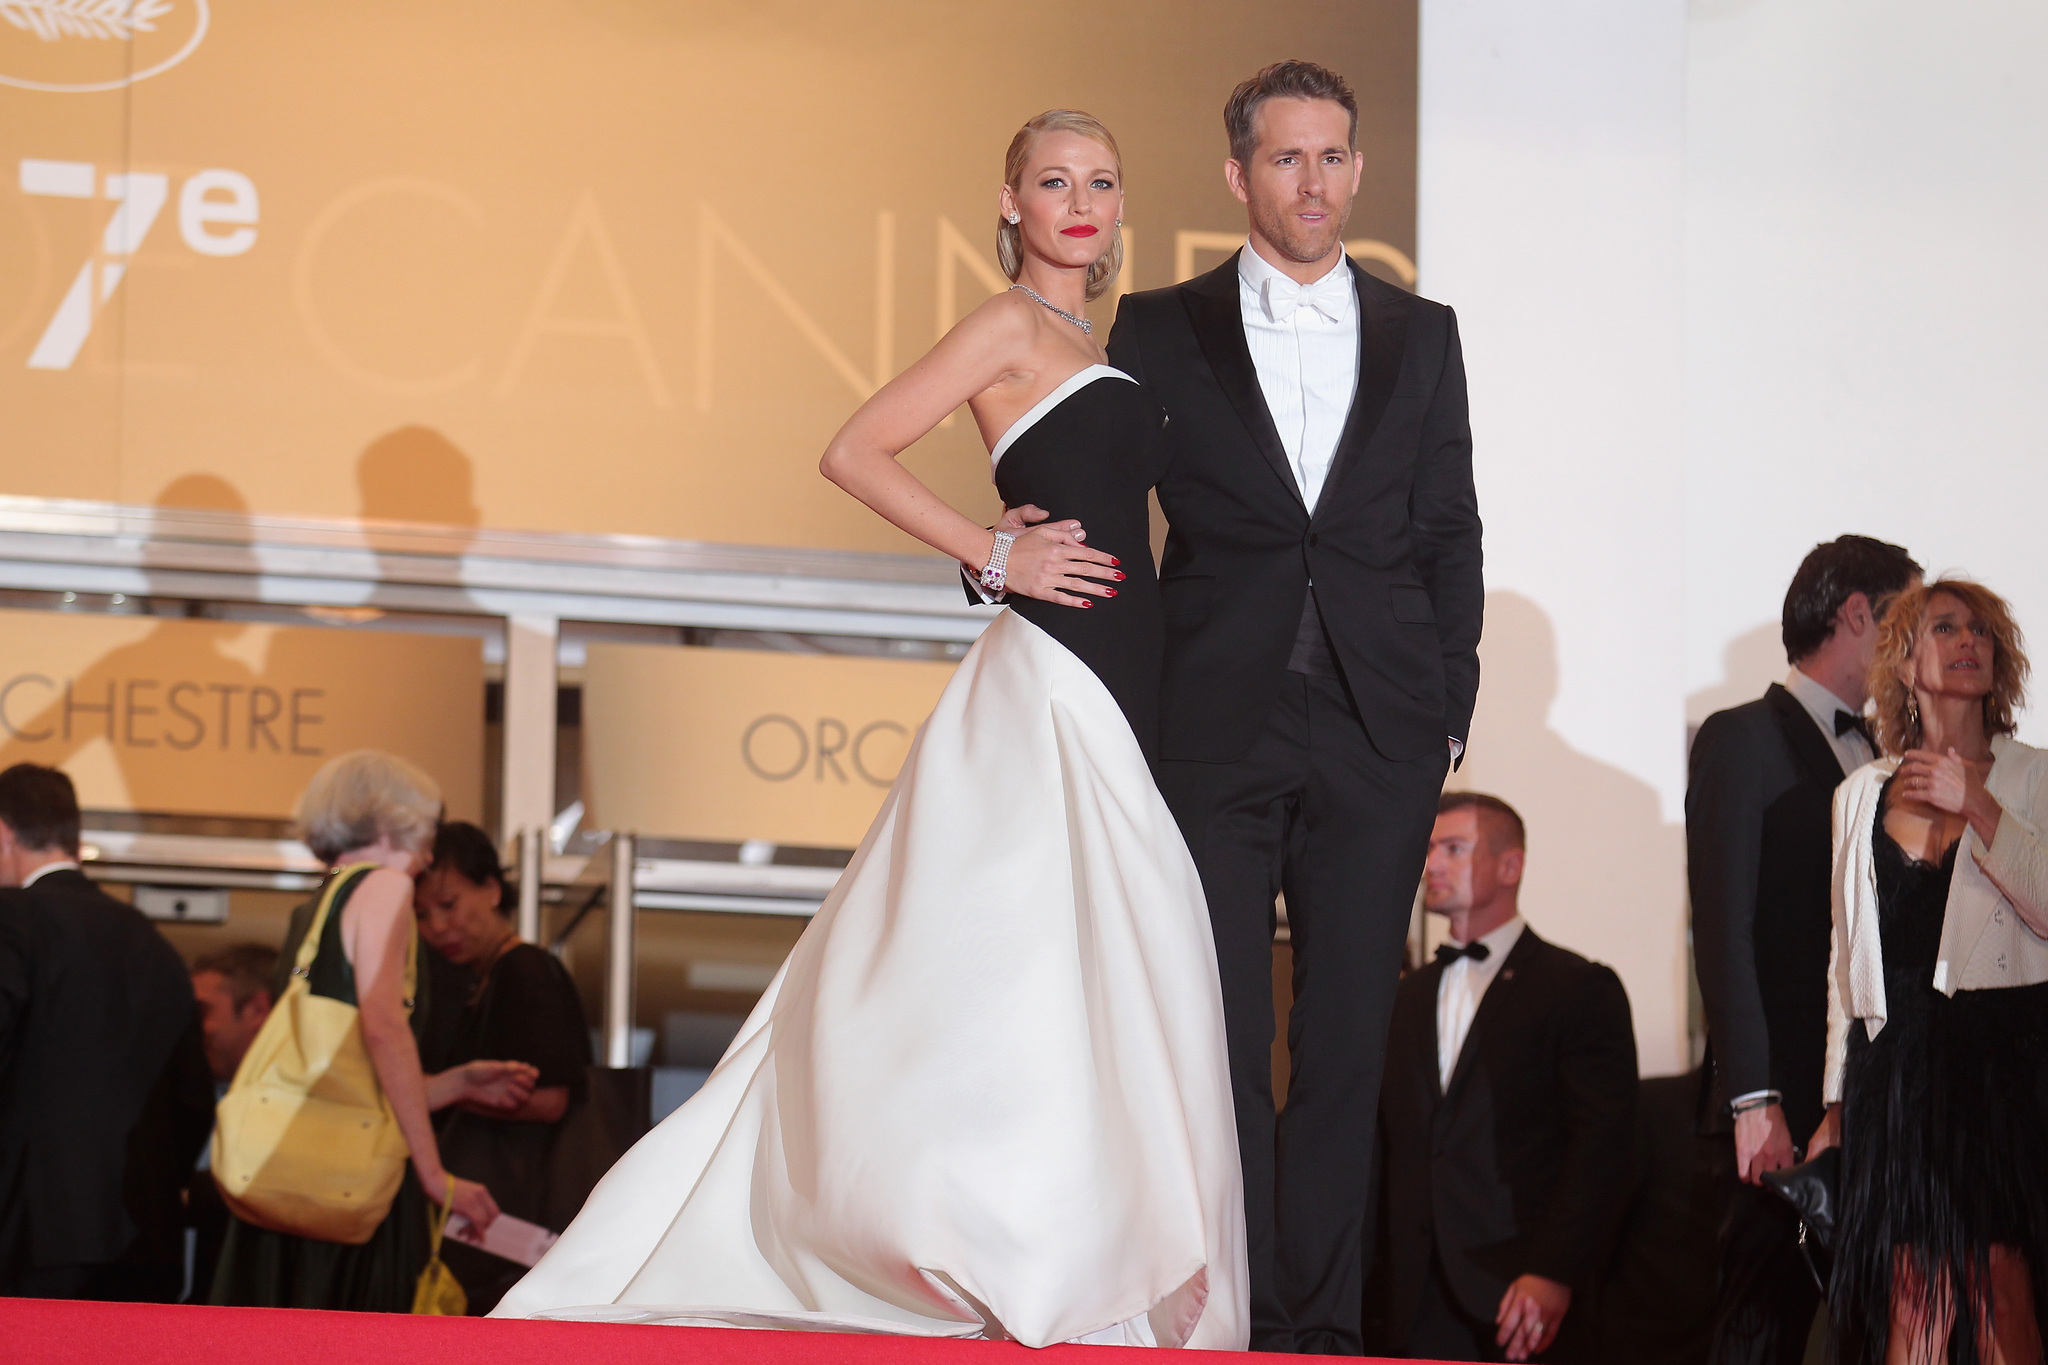 Ryan Reynolds and Blake Lively at event of The Captive (2014)